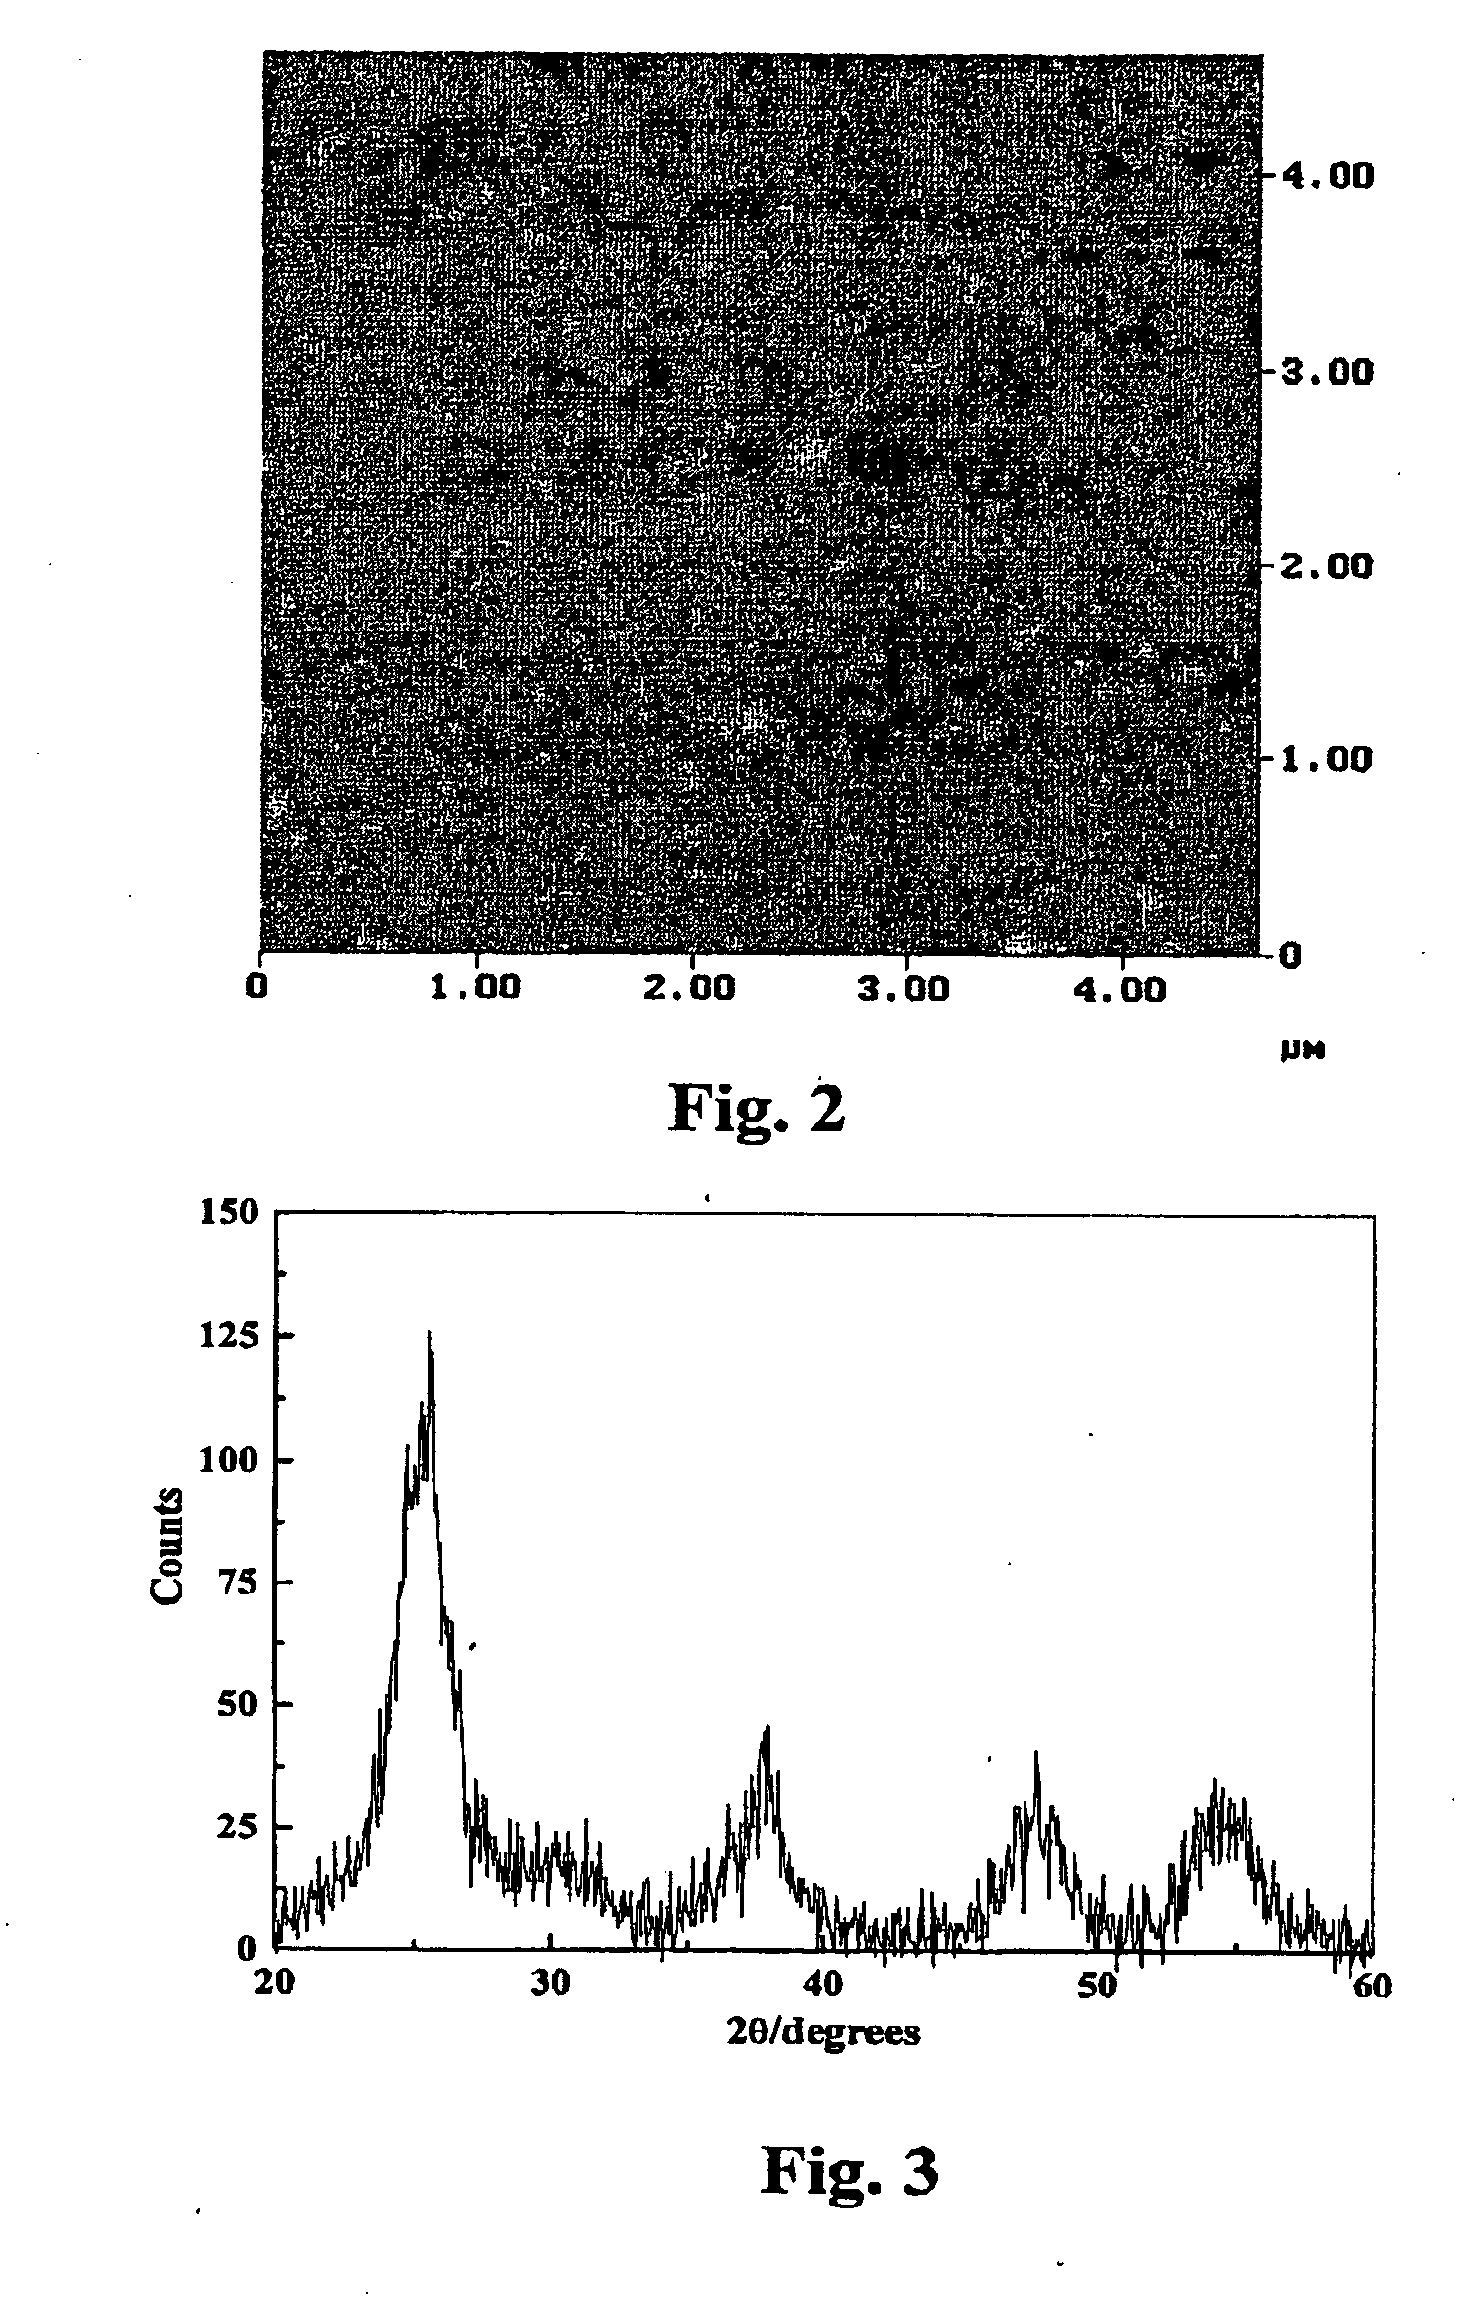 Novel TiO2 material and the coating methods thereof